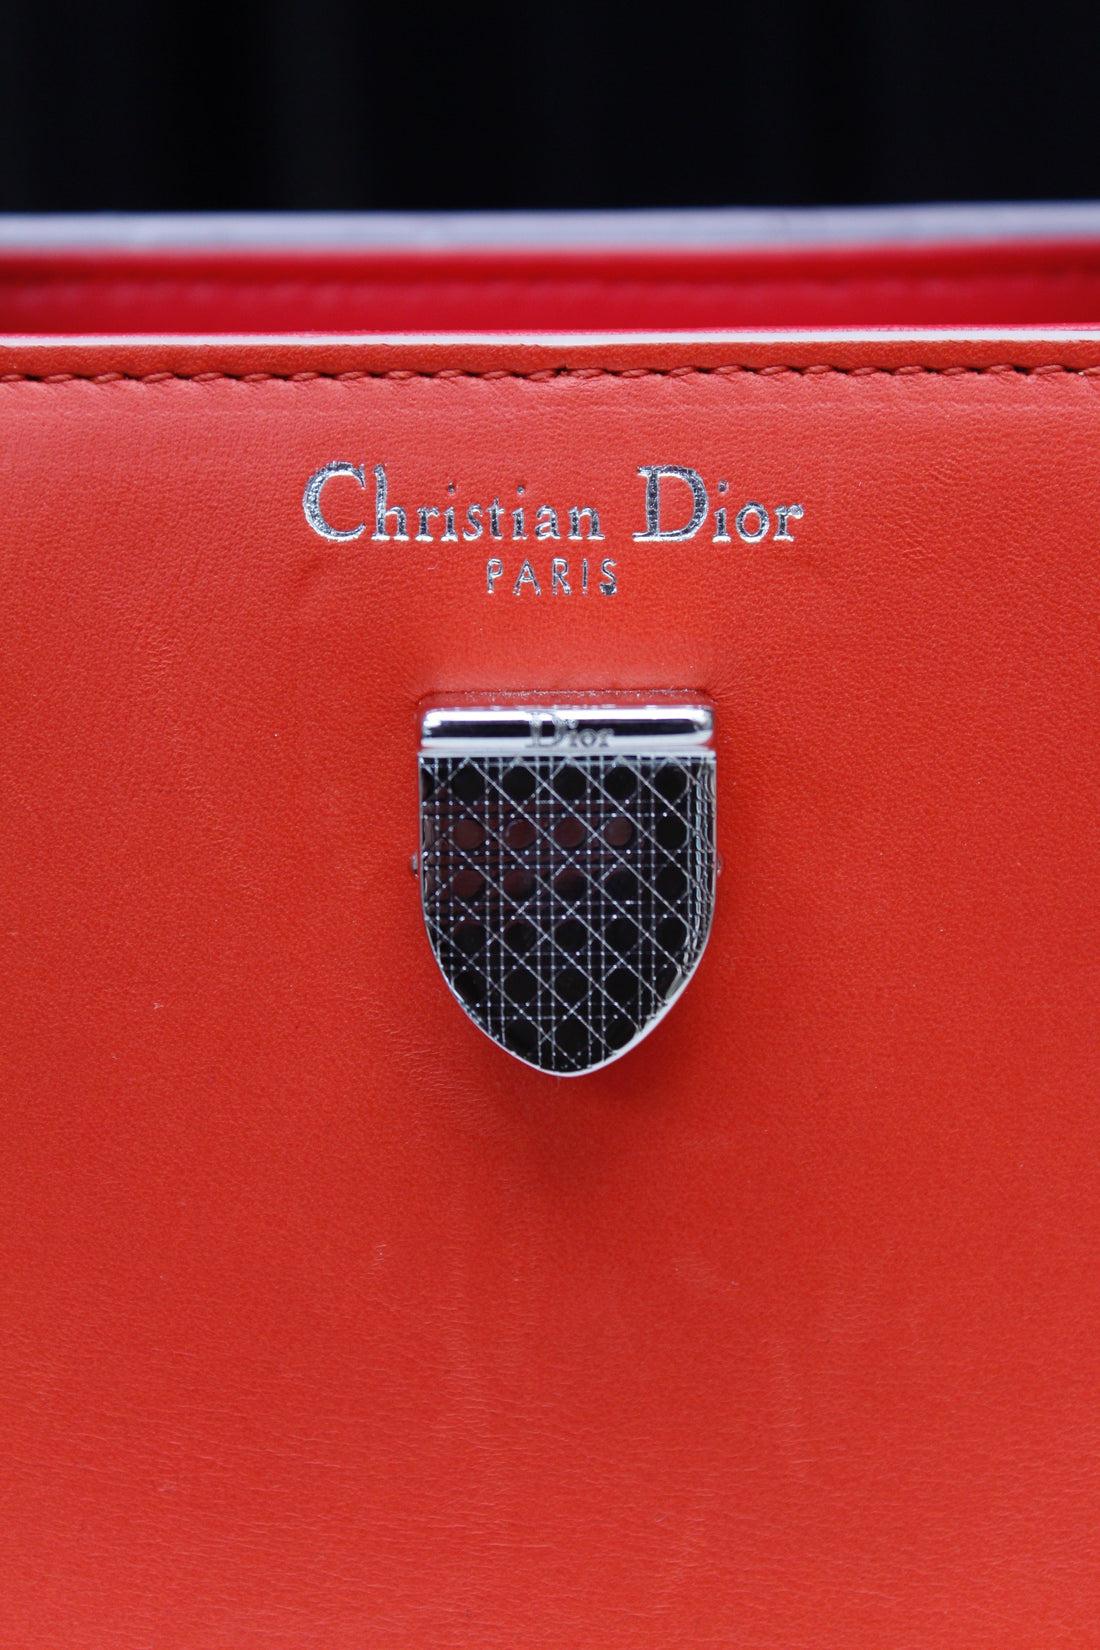 Dior Modern Leather Bag in Orange and White Leather 8